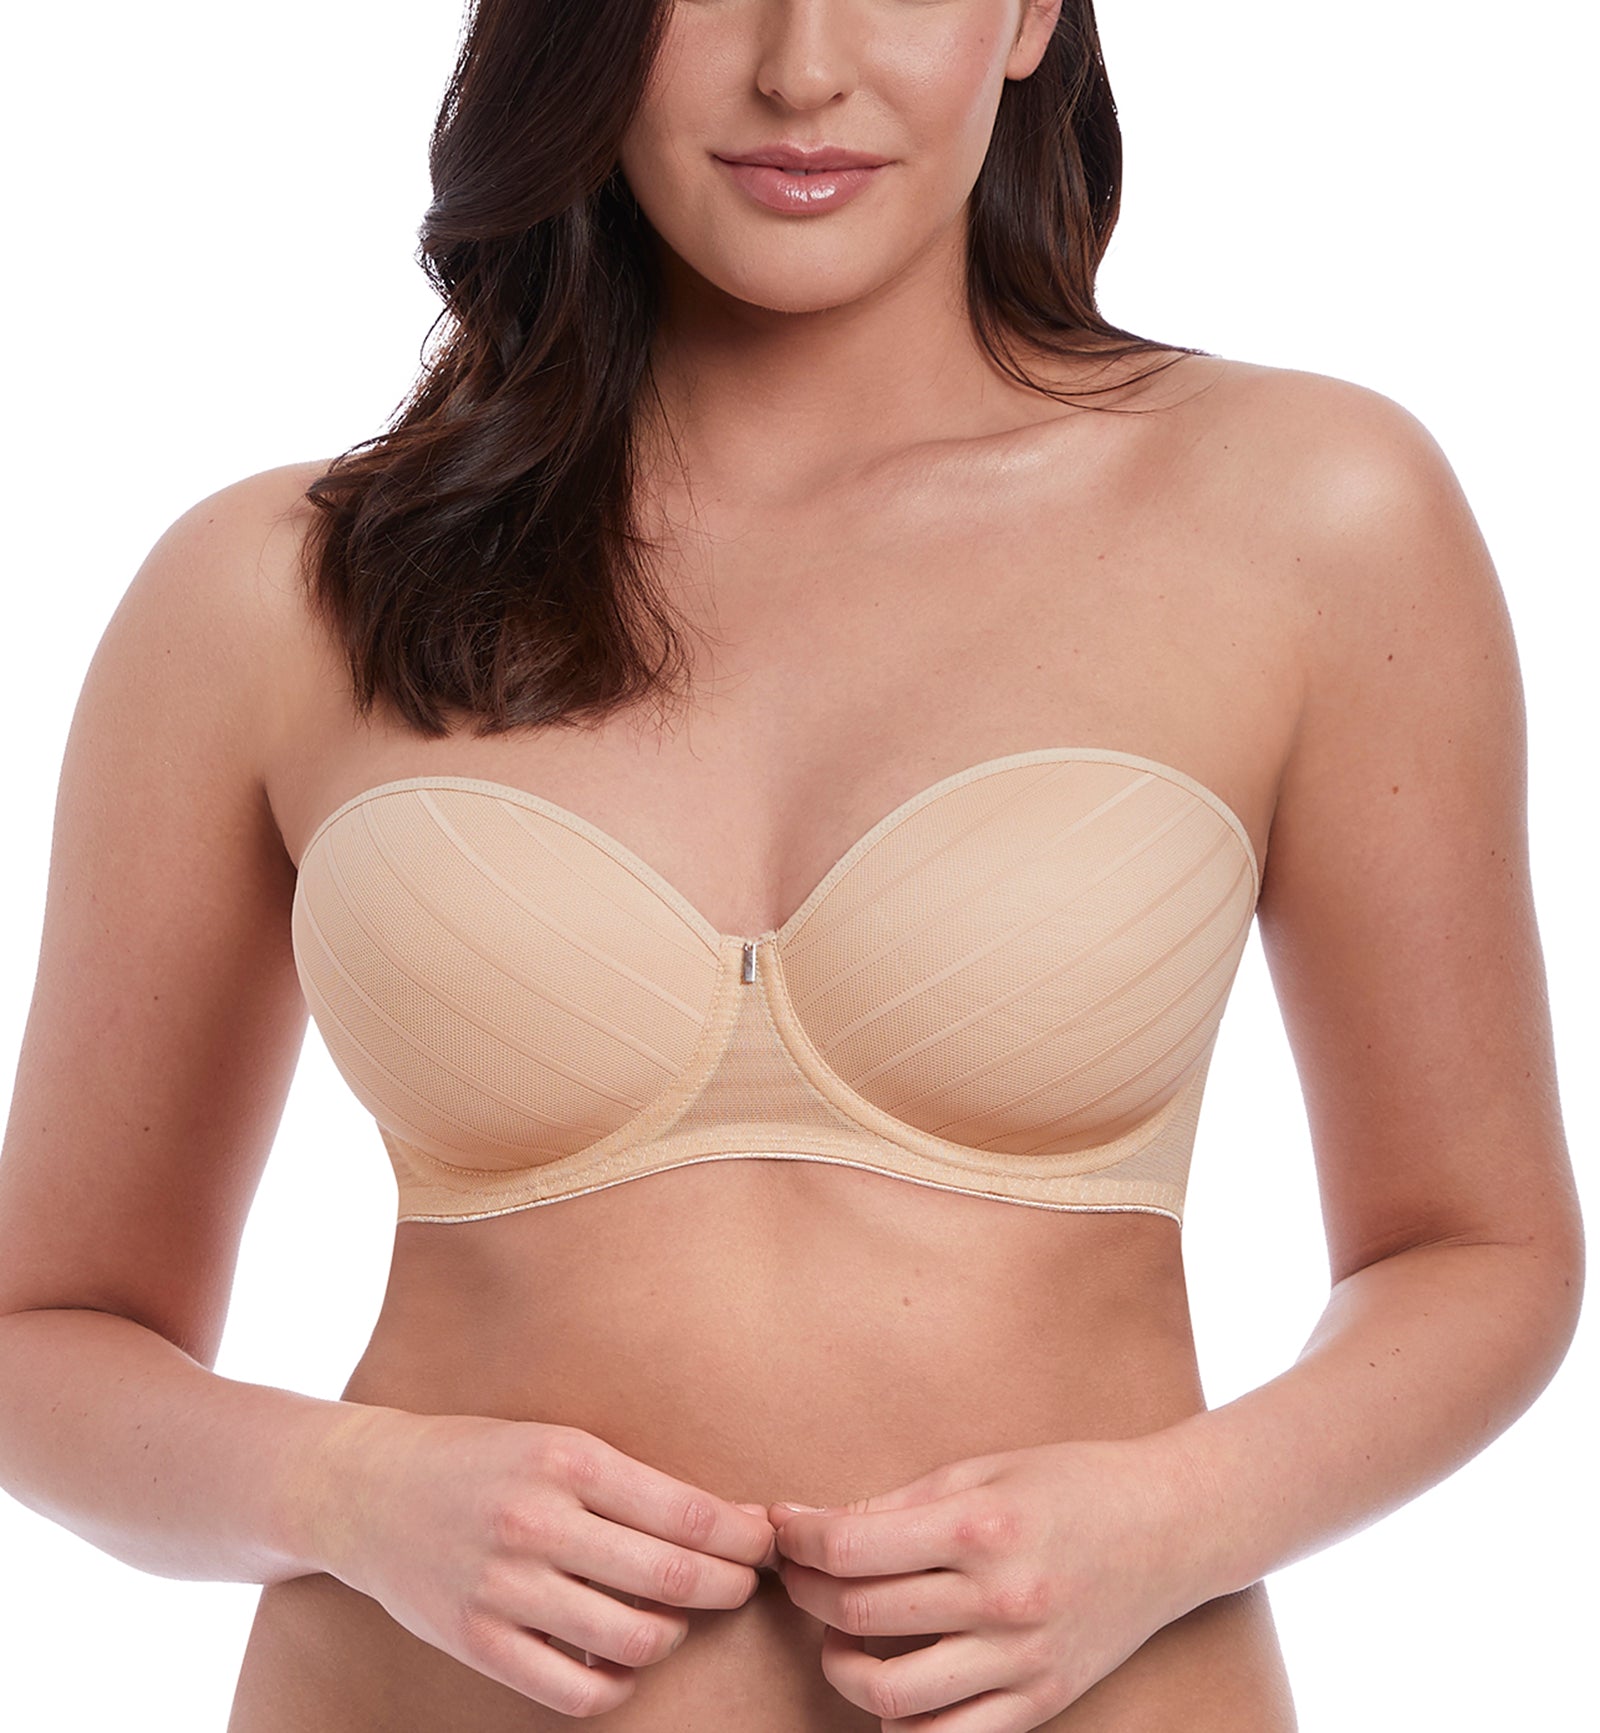 Freya Cameo Deco Strapless Moulded Underwire Bra (3163),28D,Sand - Sand,28D